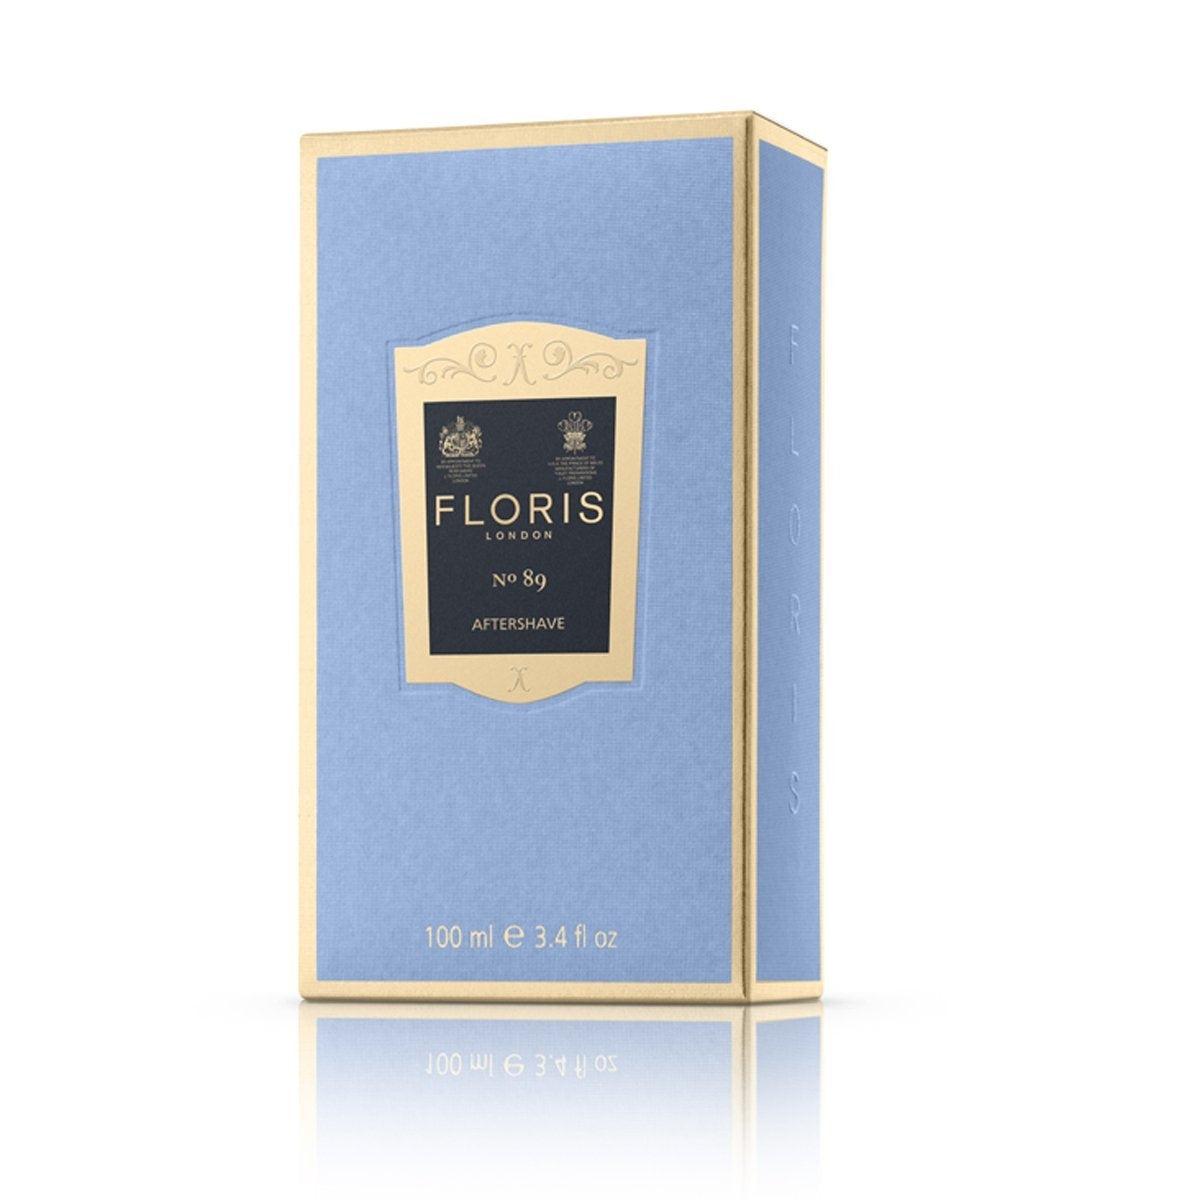 Floris No. 89 Aftershave 100ml Package